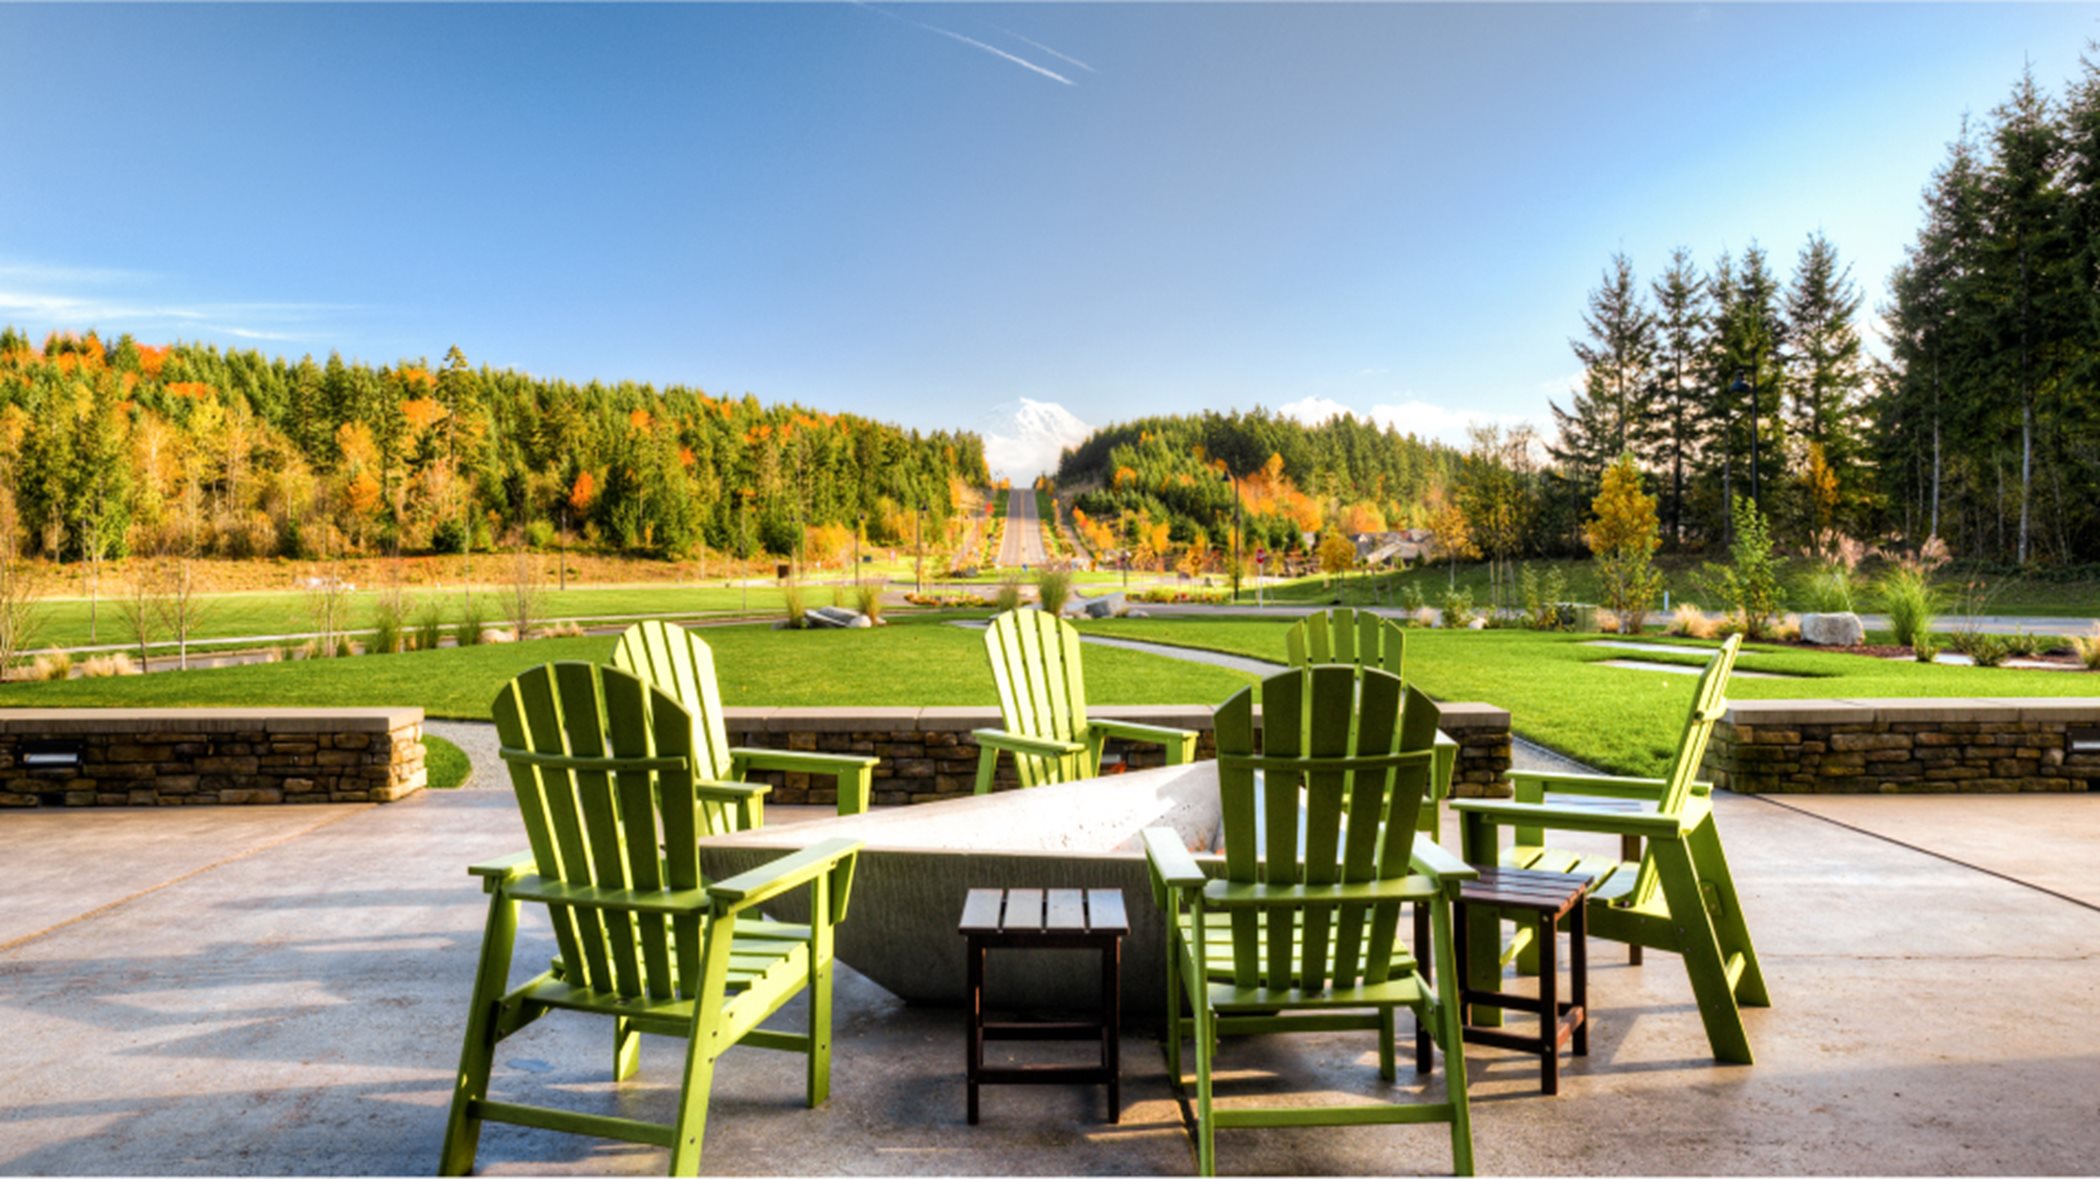 Outdoor seating and stunning views at the community center